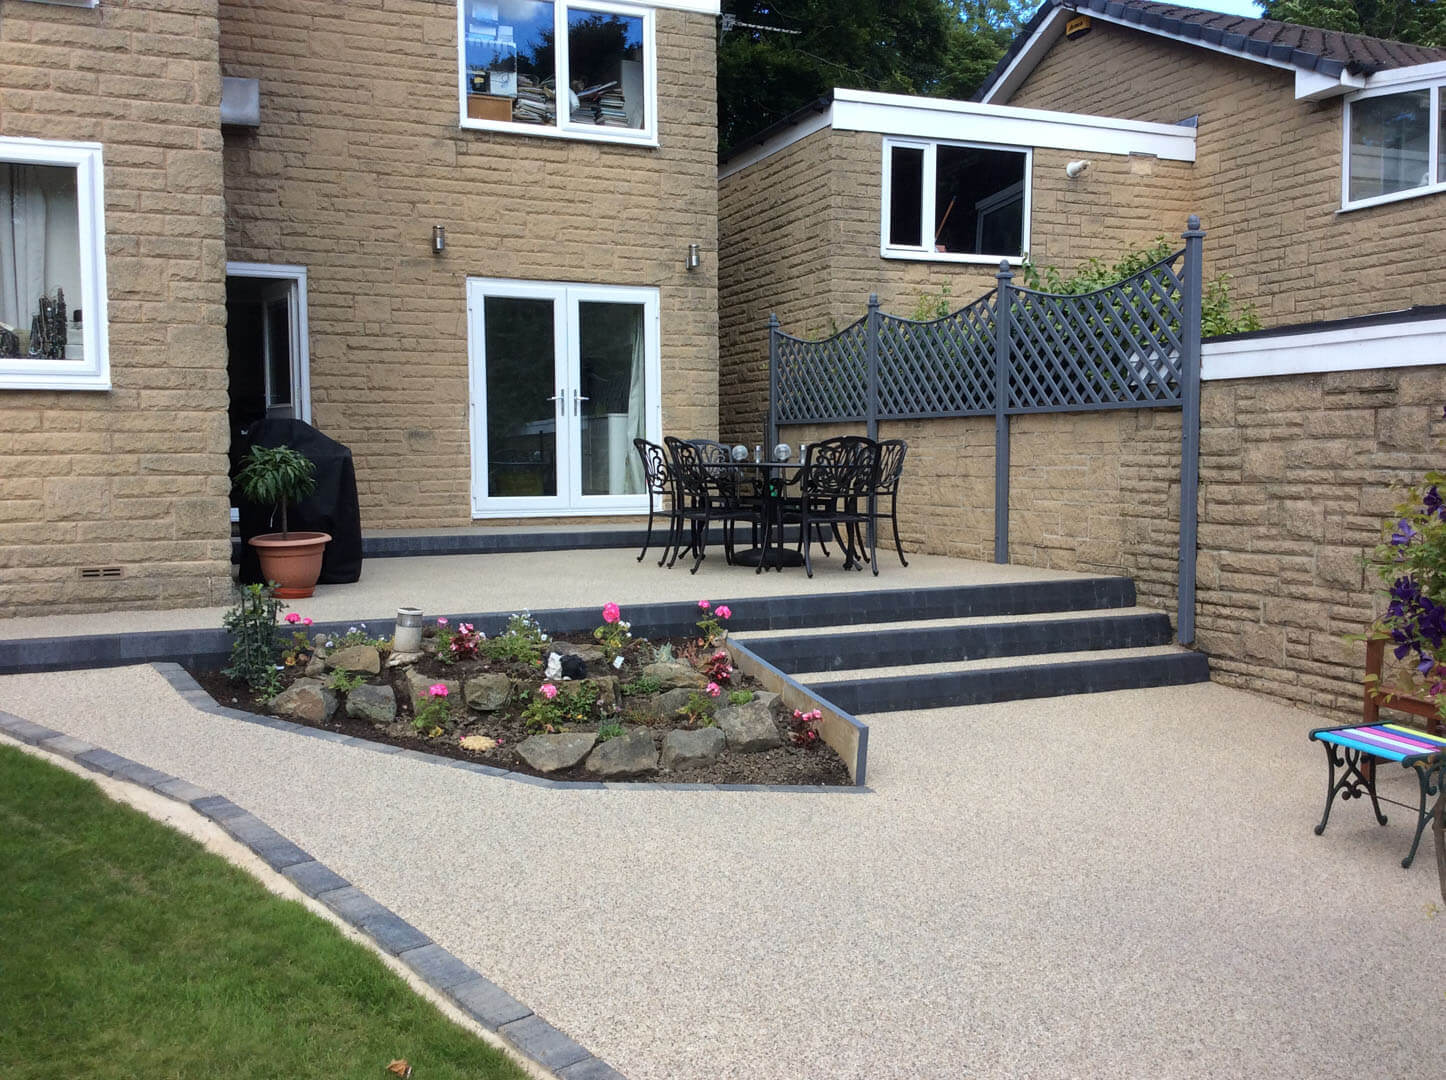 Resin pathway and patio area